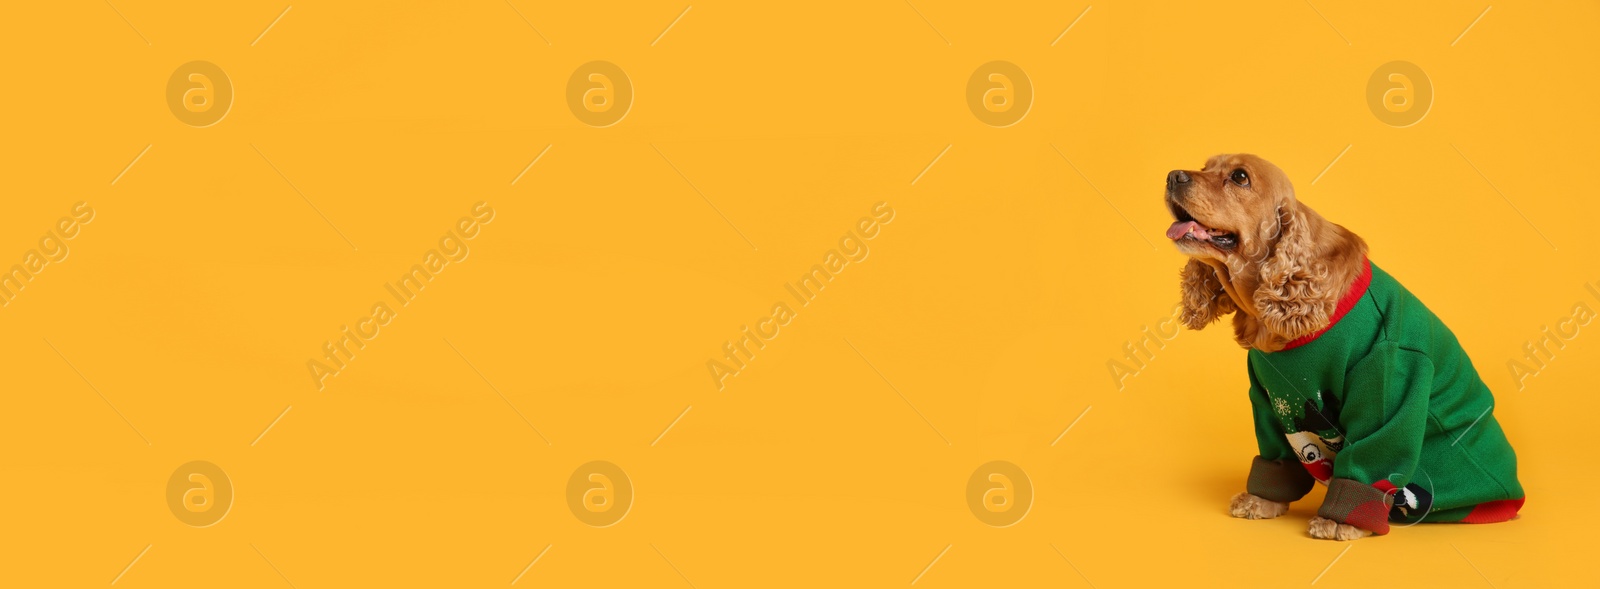 Photo of Adorable Cocker Spaniel in Christmas sweater on yellow background, space for text